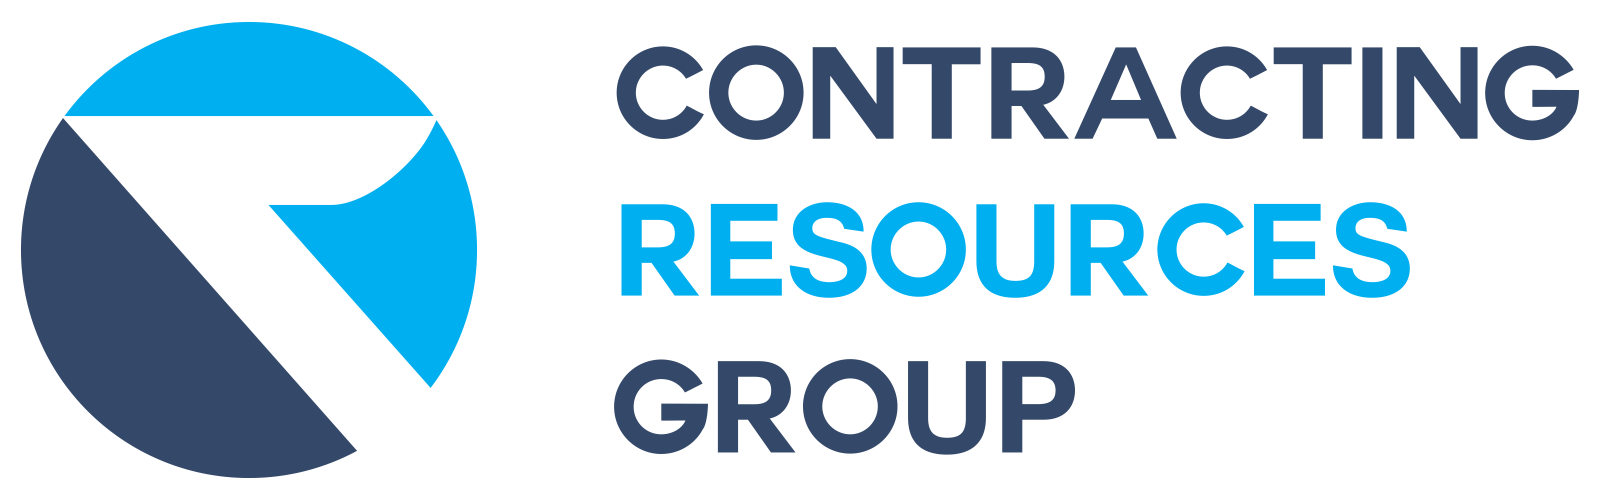 Contracting Resources Group, Inc.